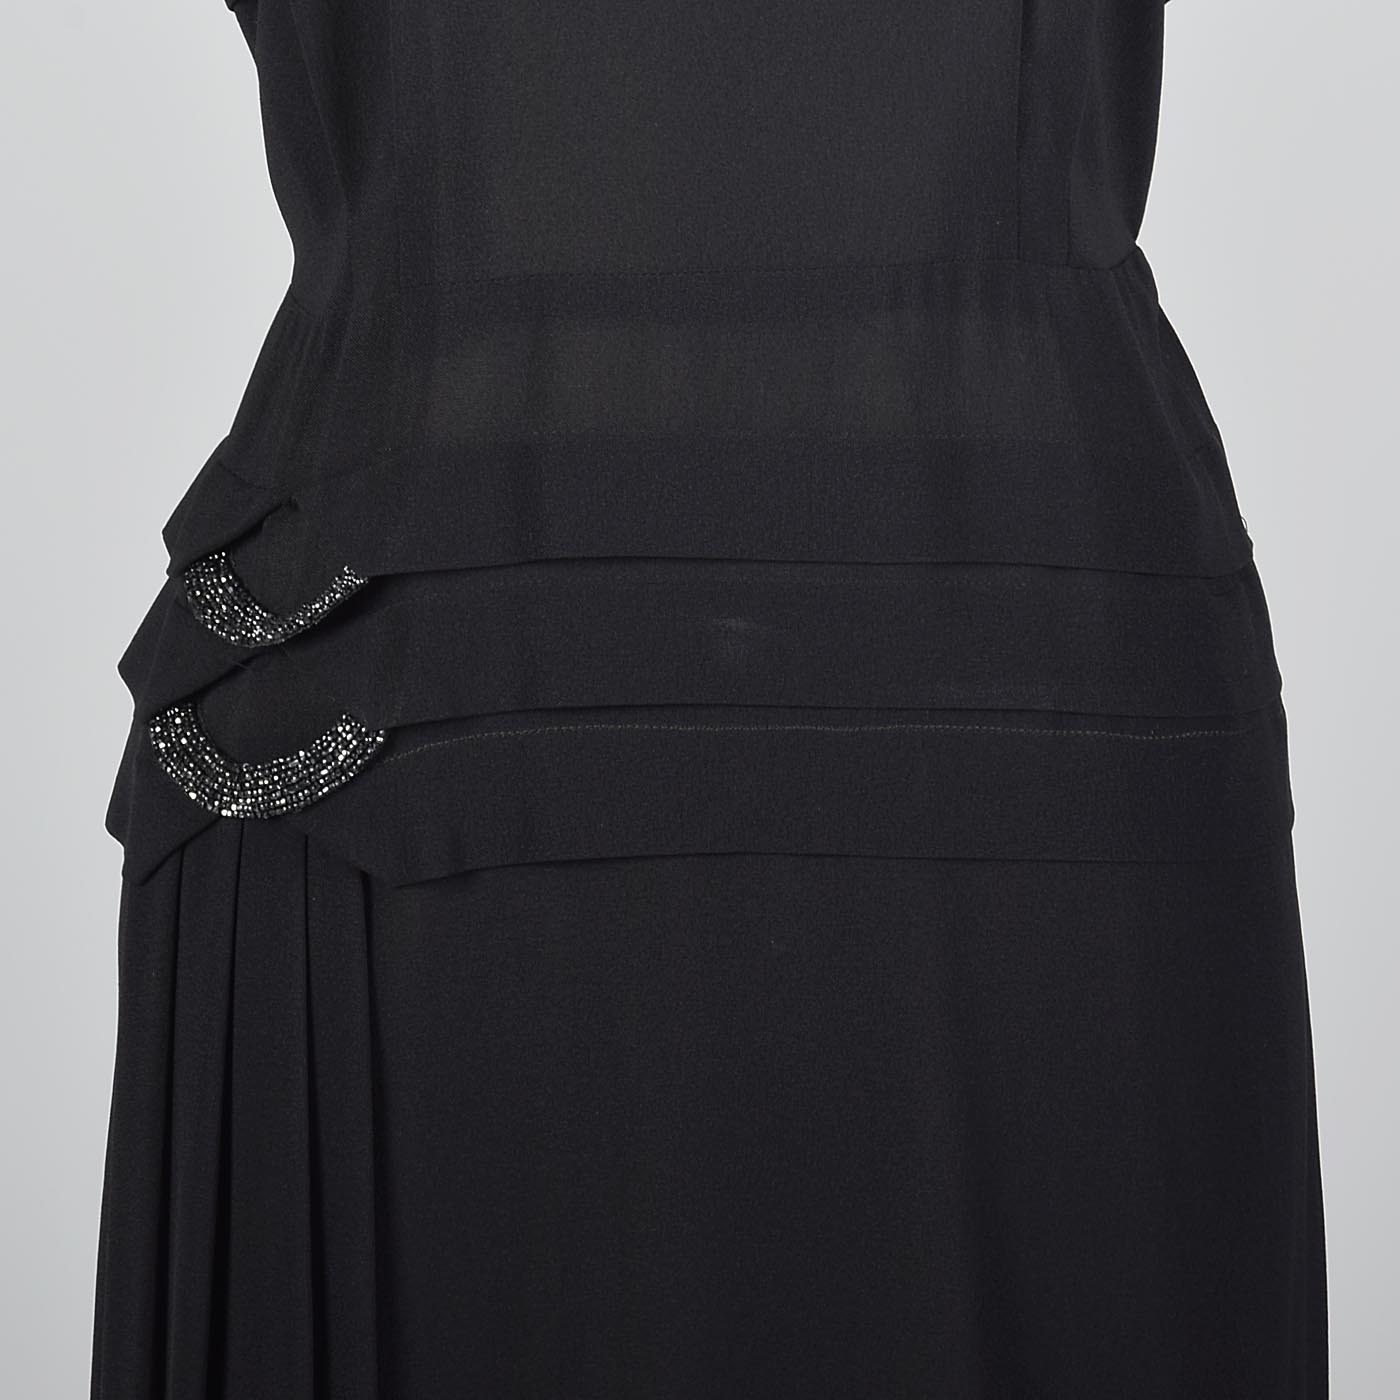 1950s Black Dress with Beaded Loops and Sash